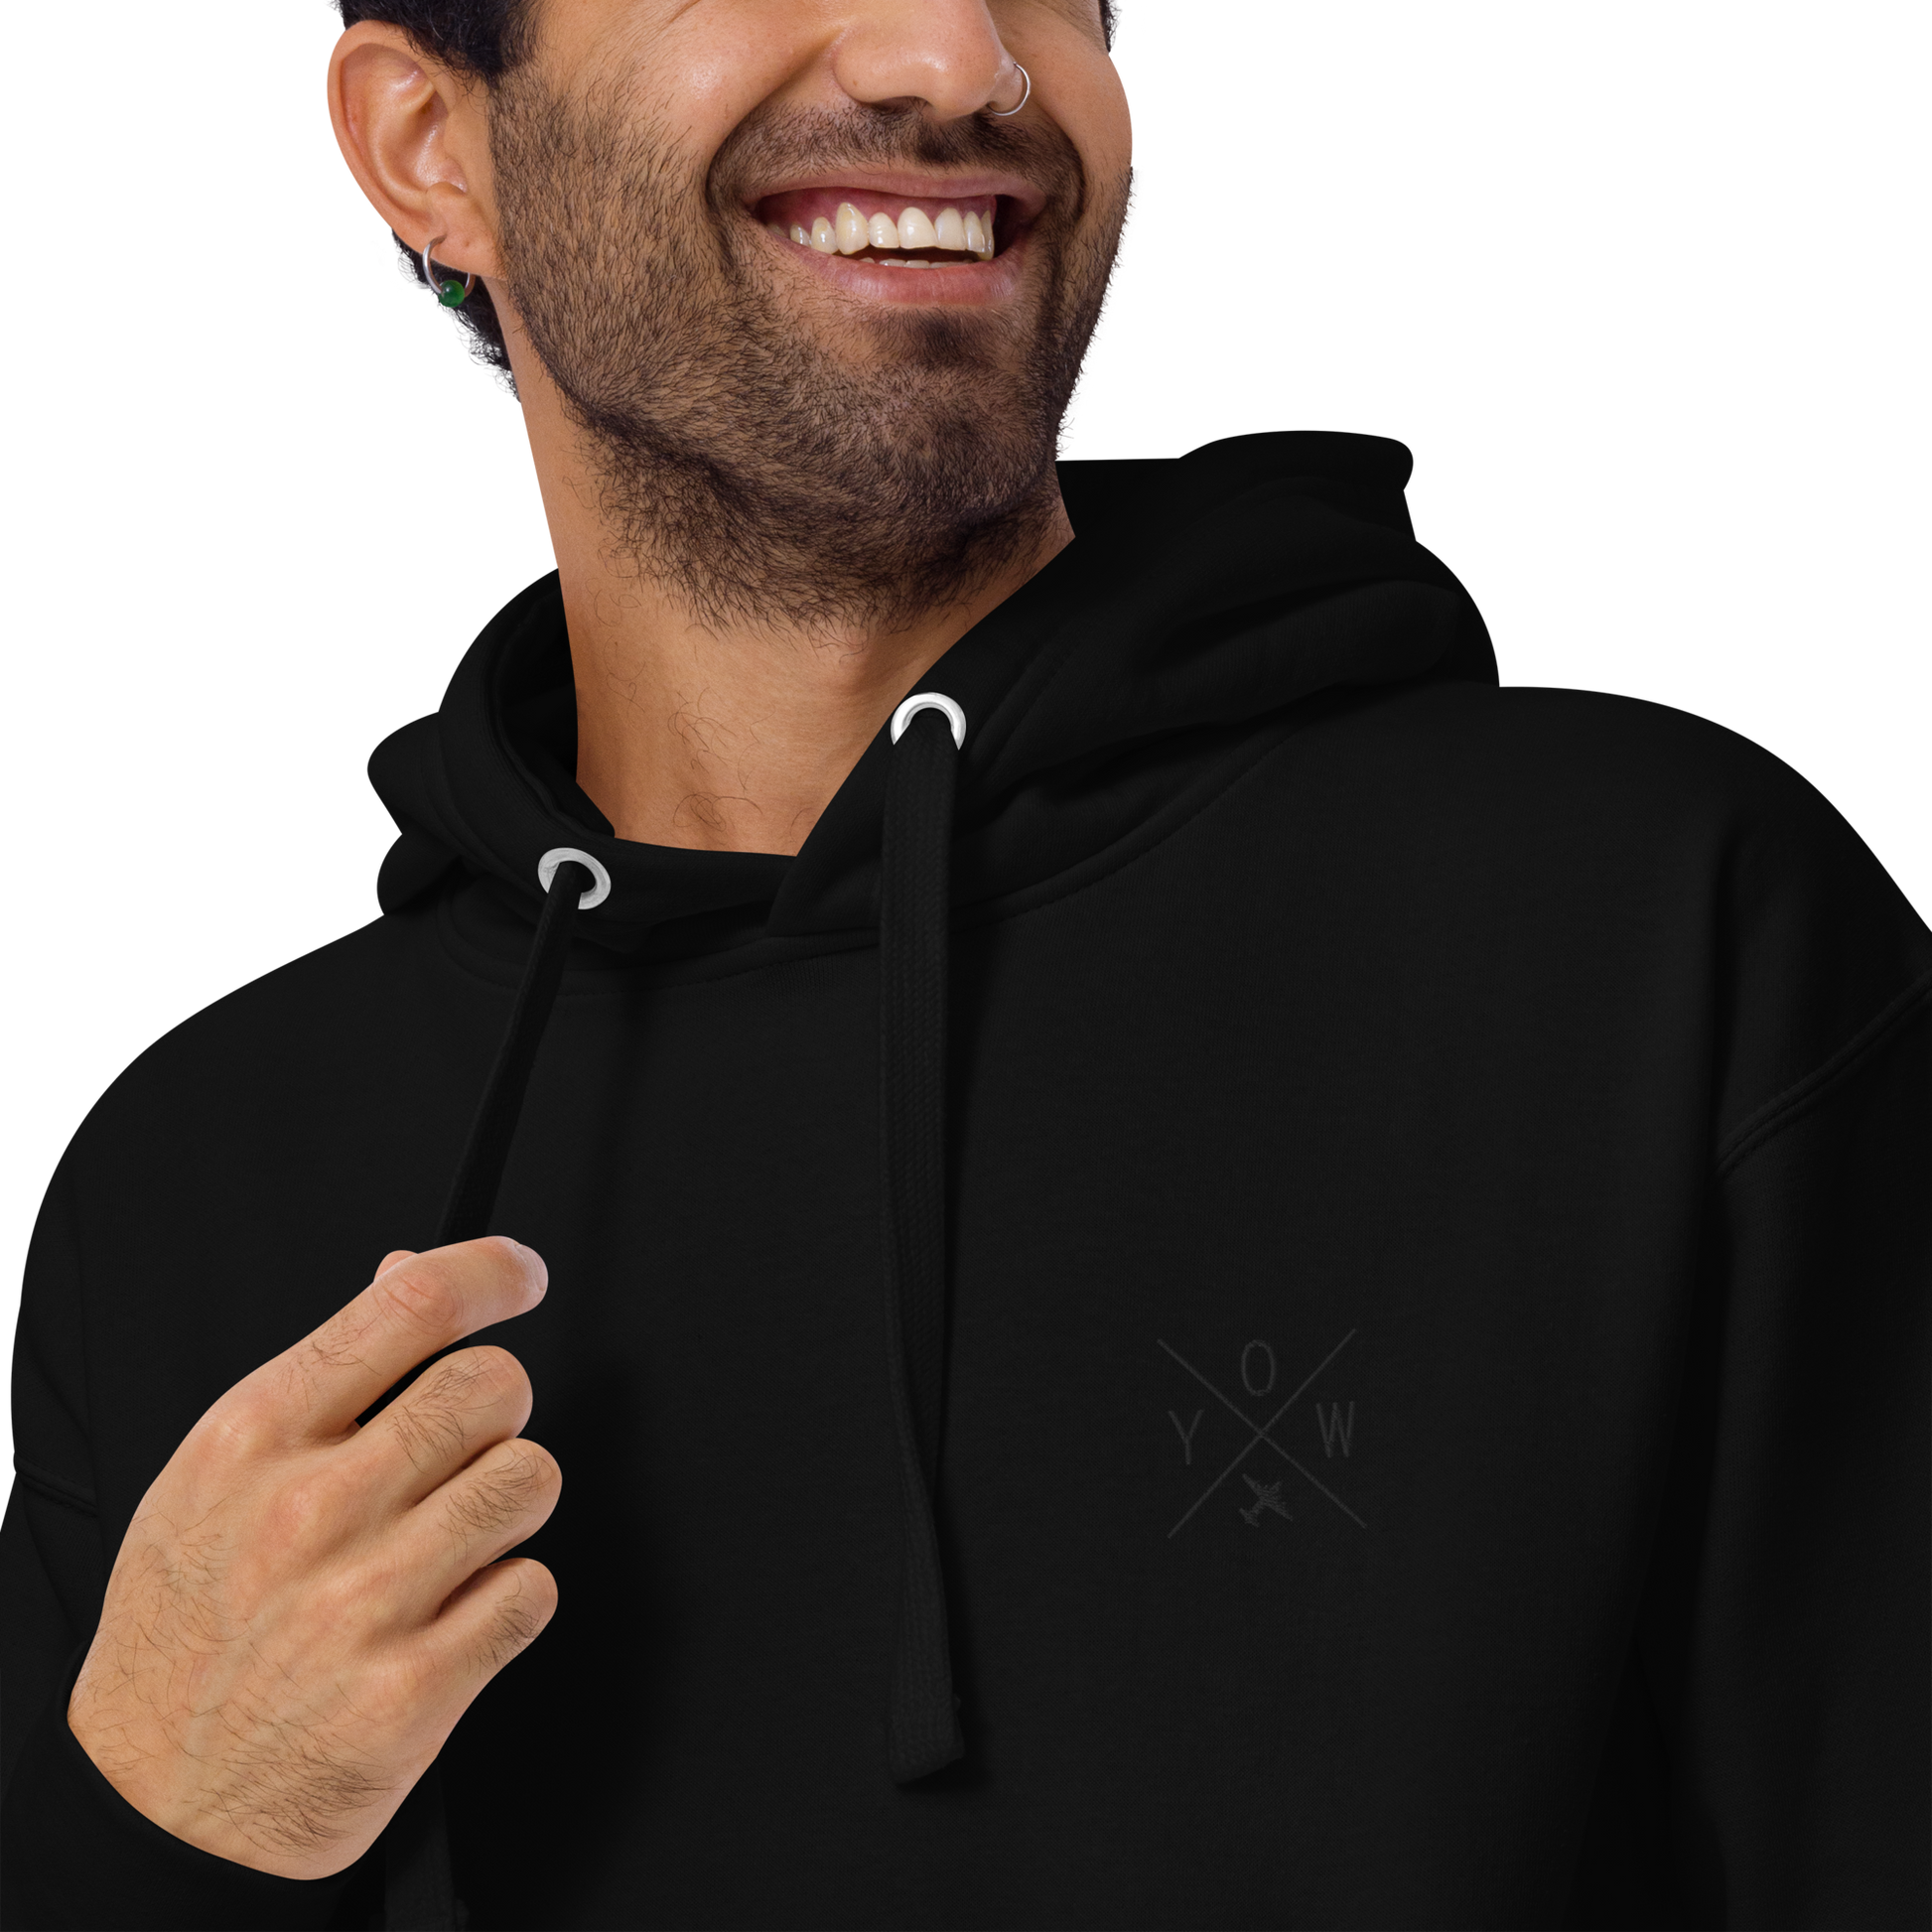 YHM Designs - YOW Ottawa Premium Hoodie - Crossed-X Design with Airport Code and Vintage Propliner - Black Embroidery - Image 10